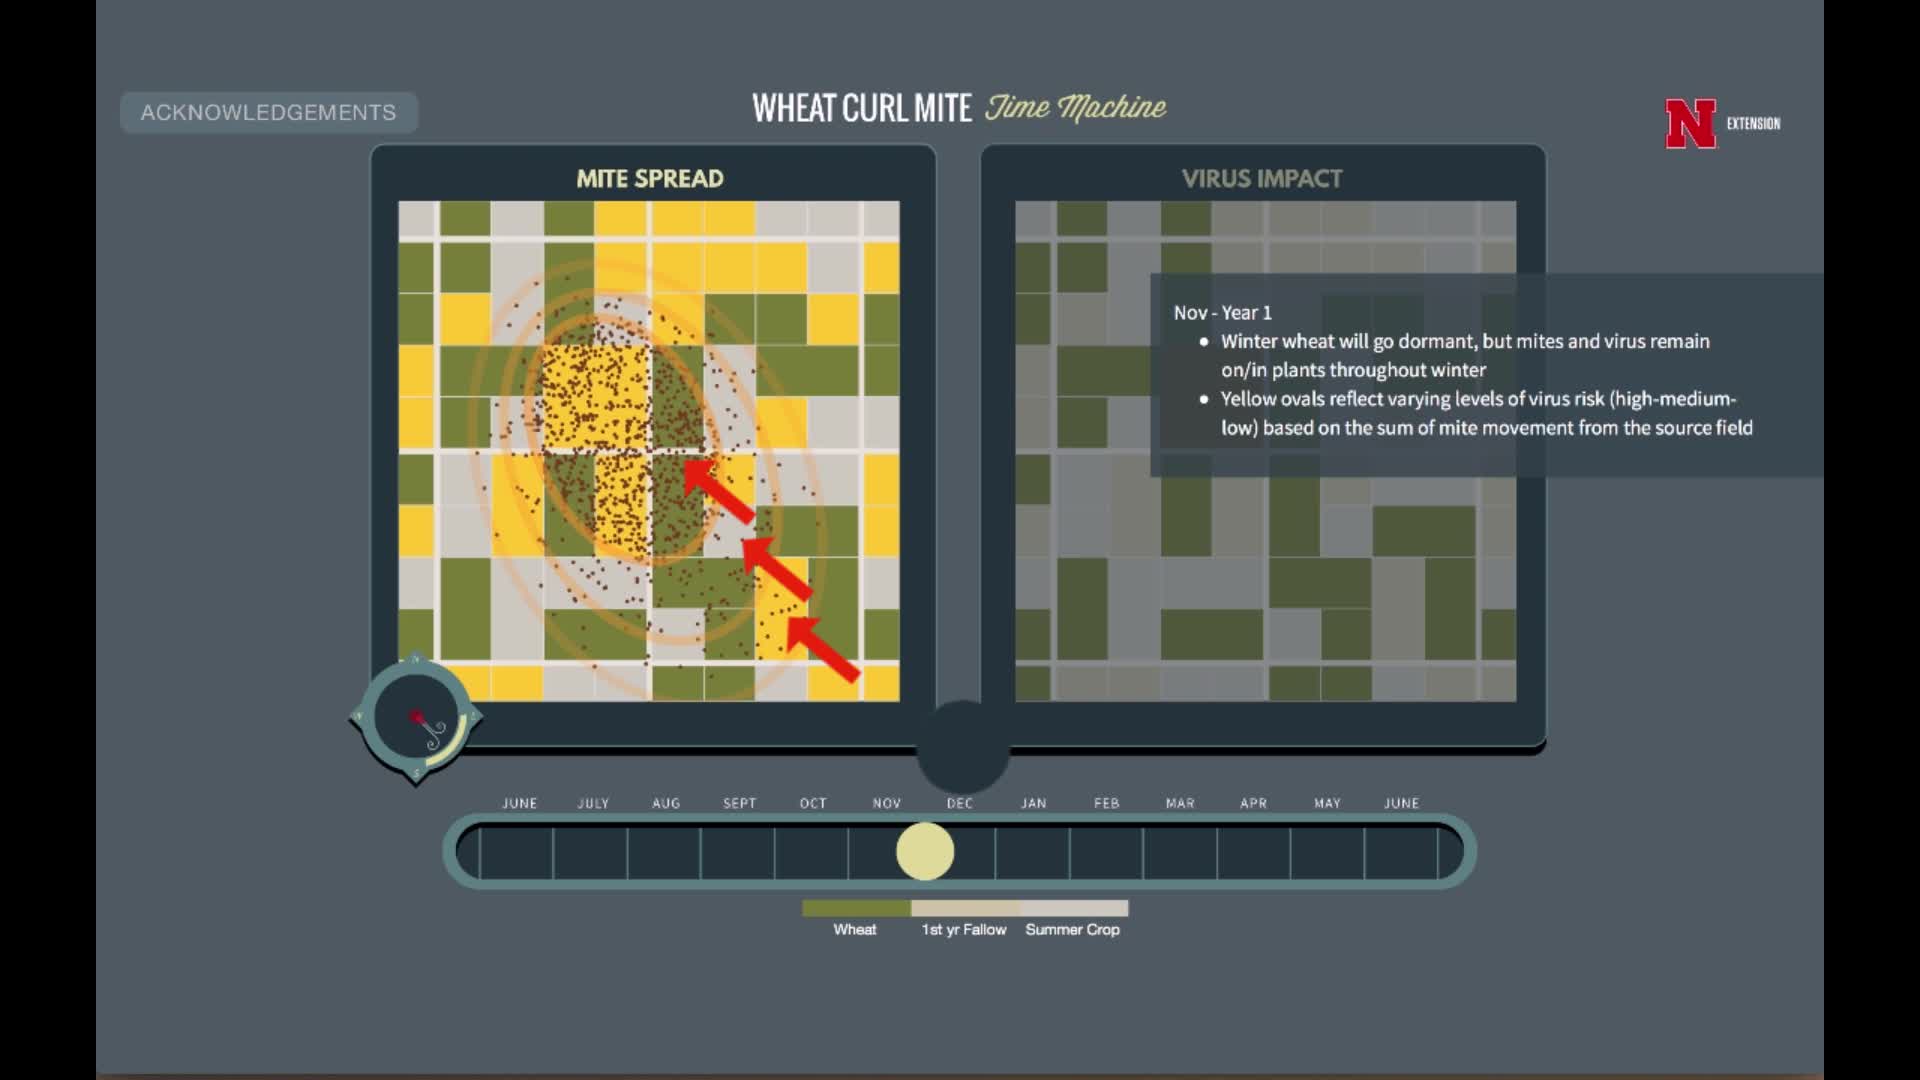 Wheat Curl Mite Time Machine: an animation demonstrating mite movement and virus impact 